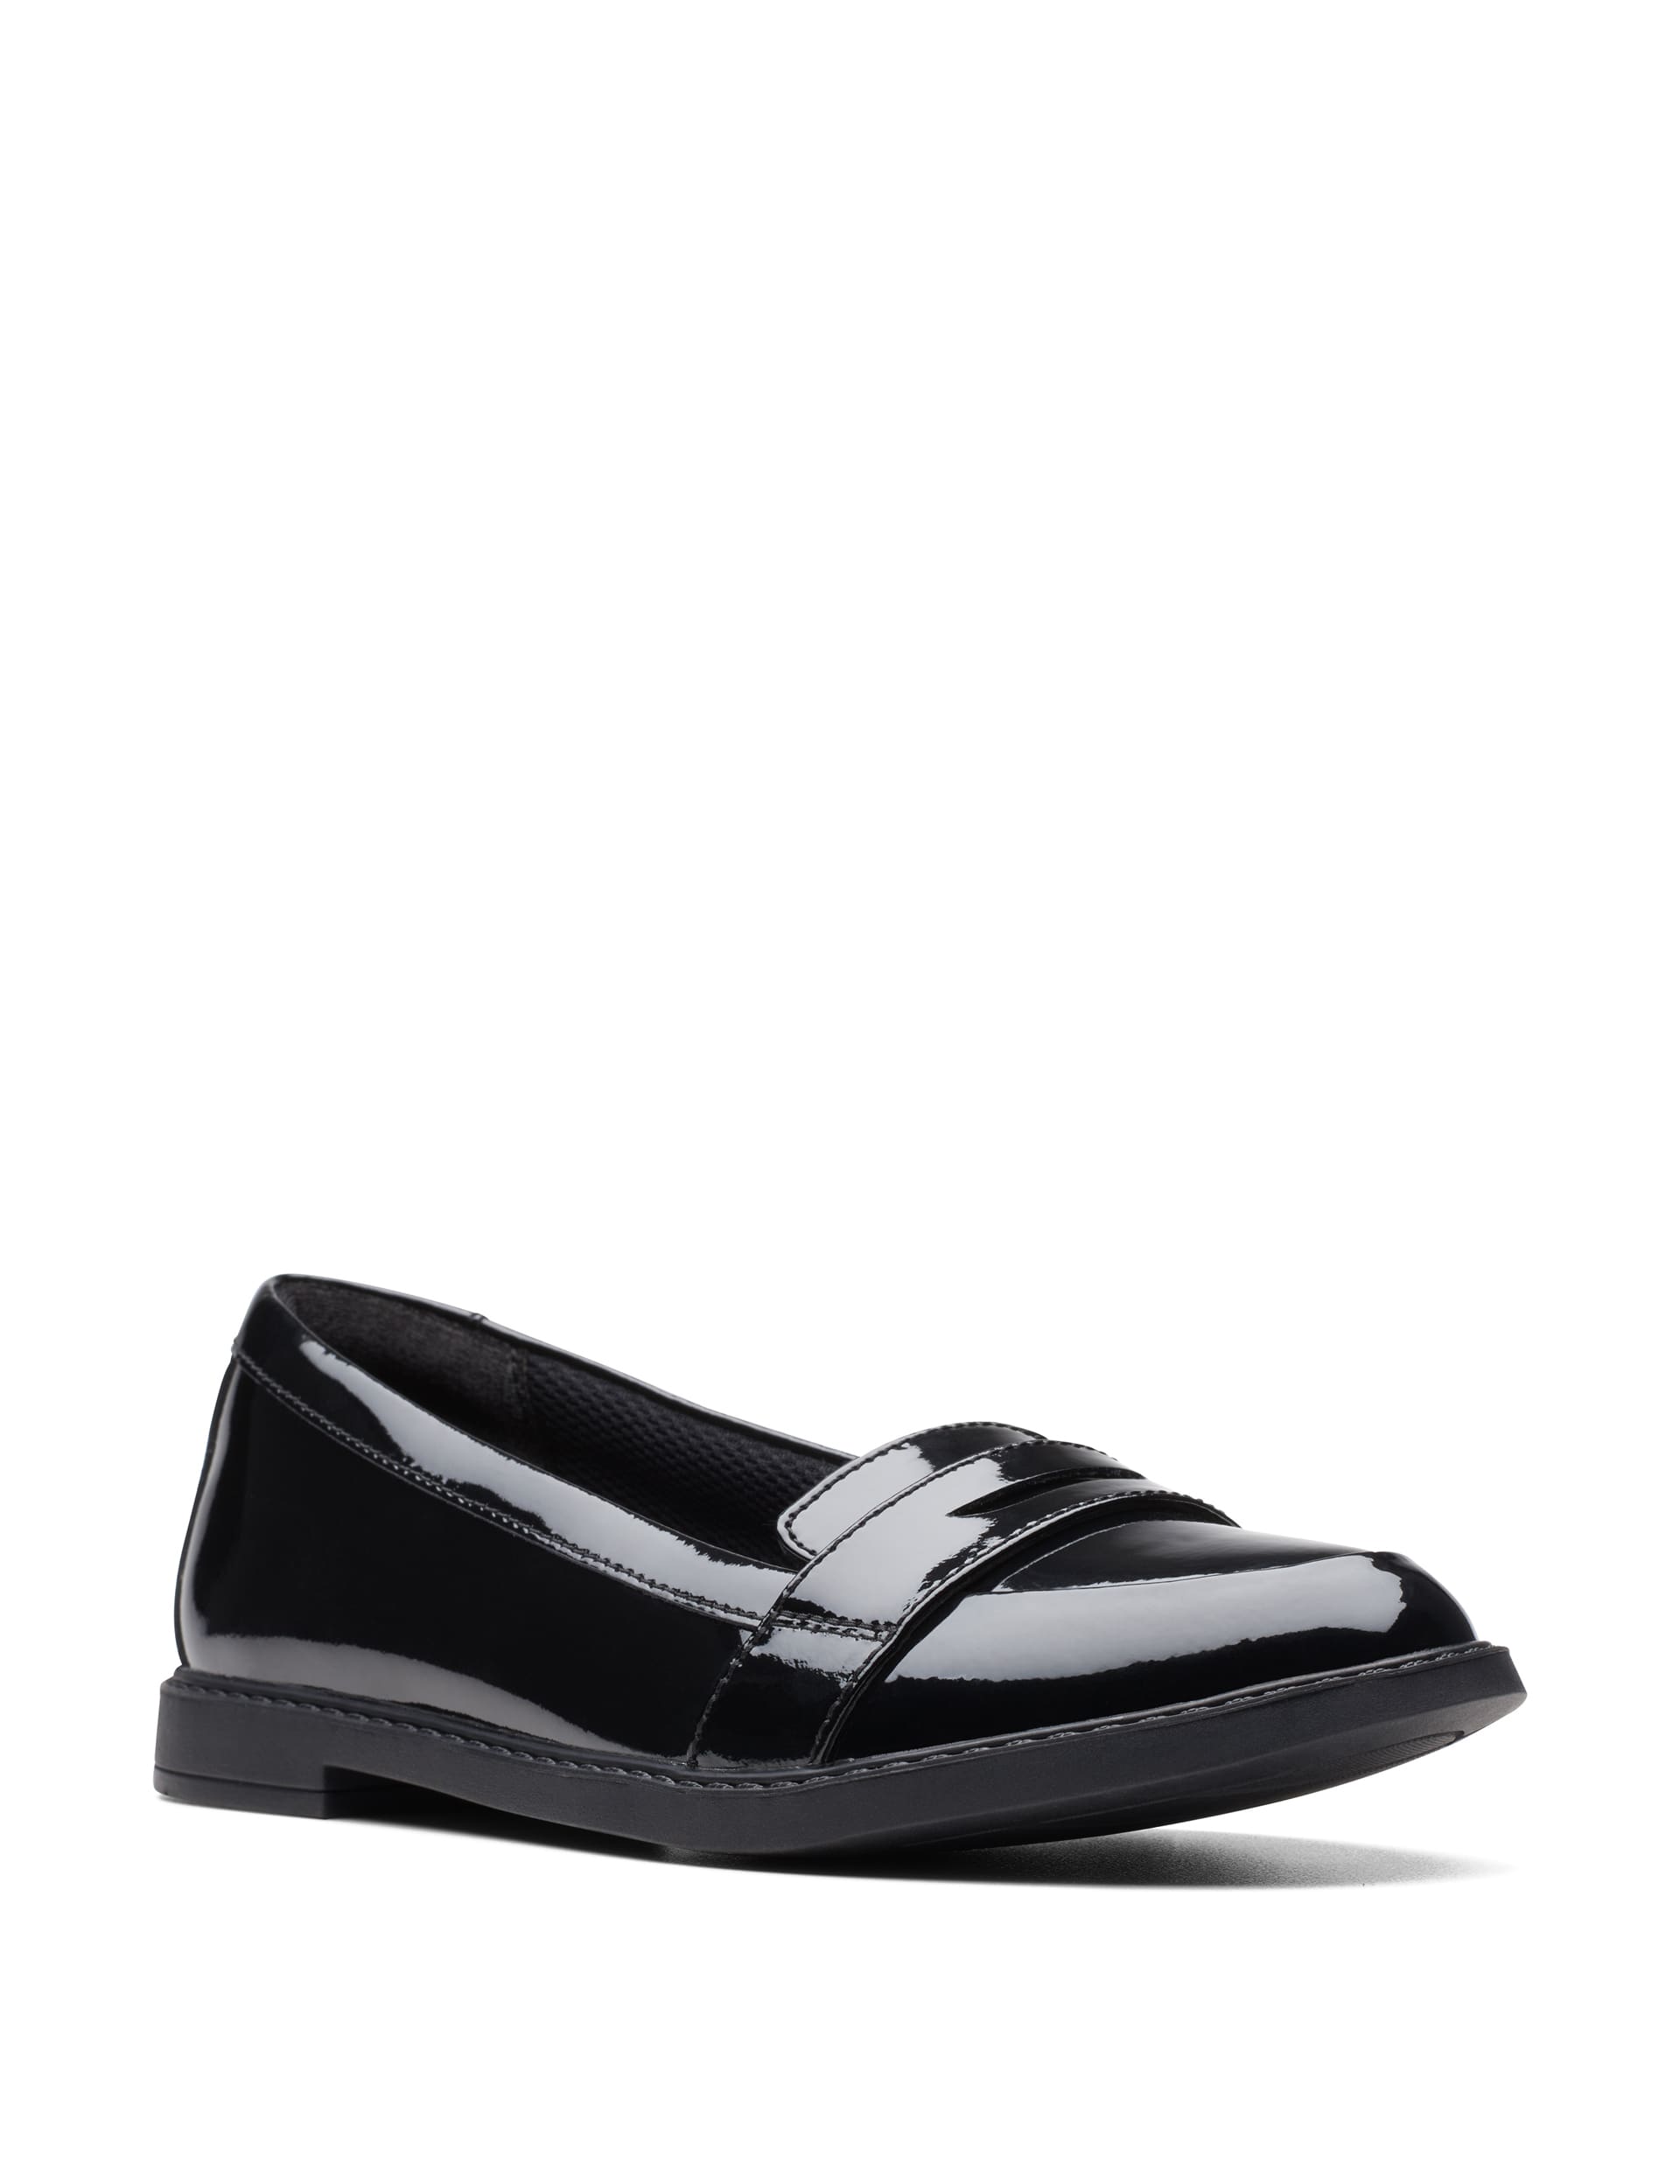 Kids' Patent Leather Slip-On Loafers (3 Small - 8 Small)